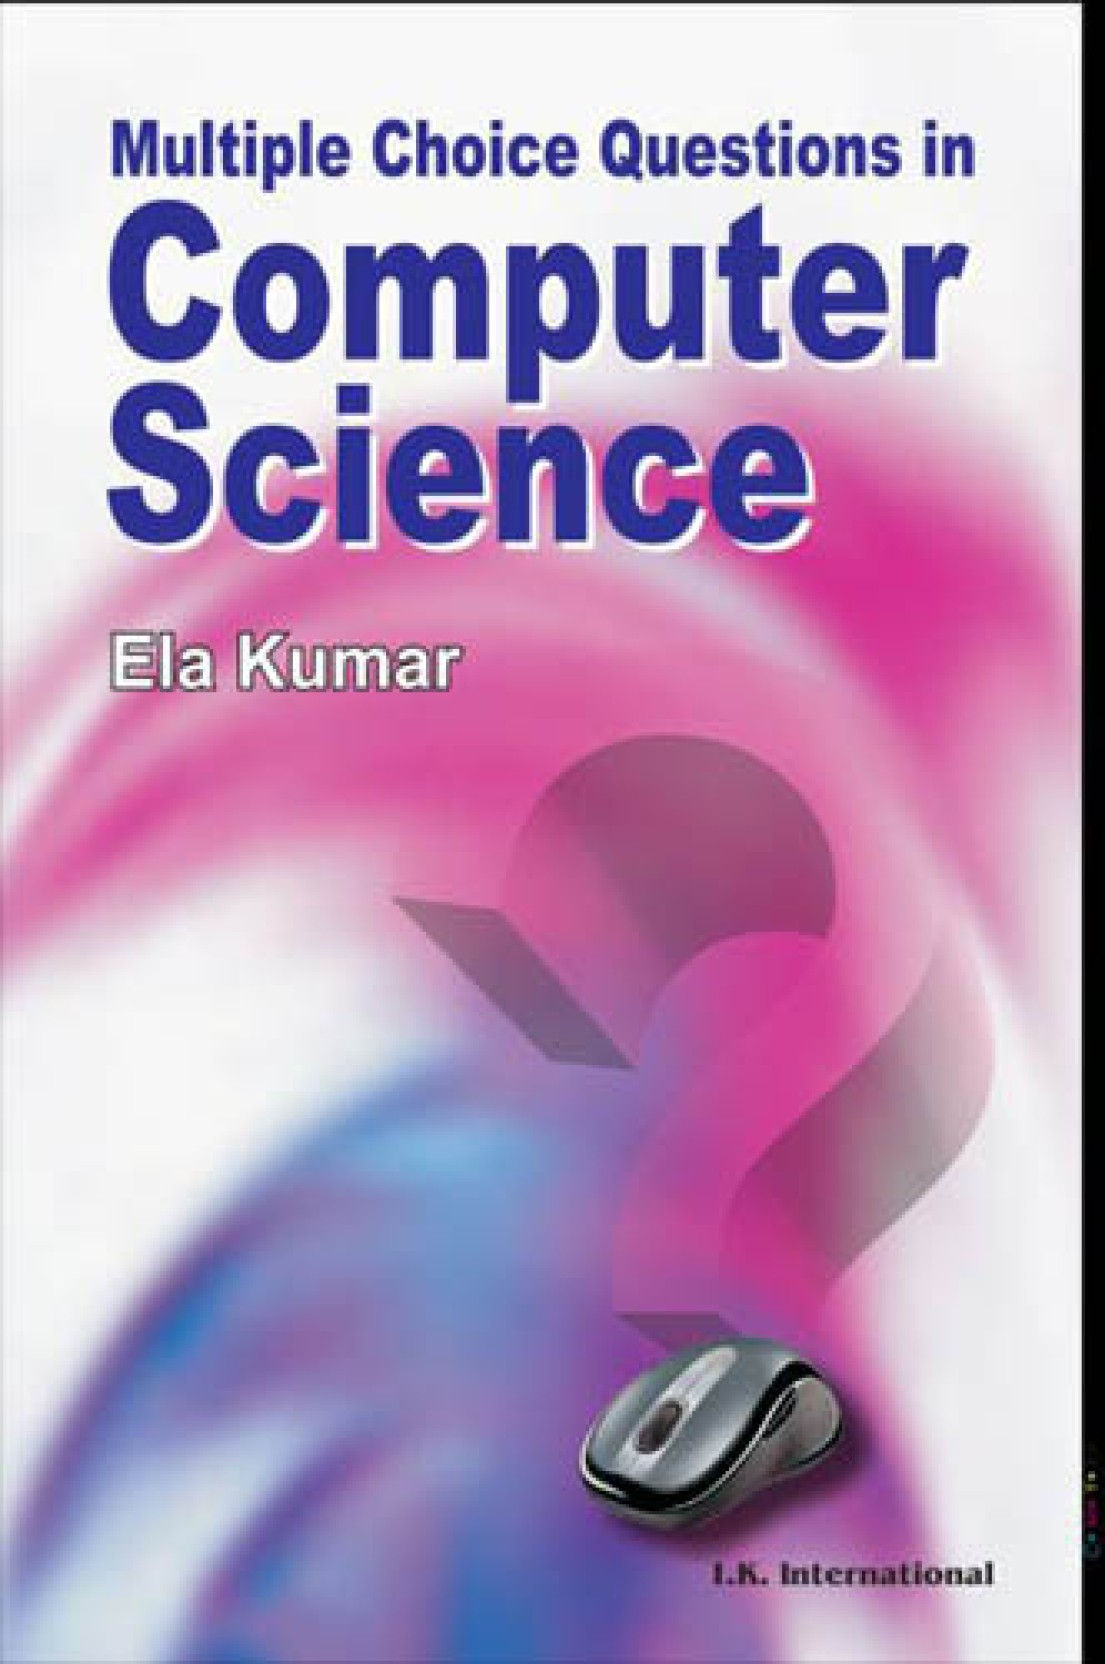 multiple-choice-questions-in-computer-science-buy-multiple-choice-questions-in-computer